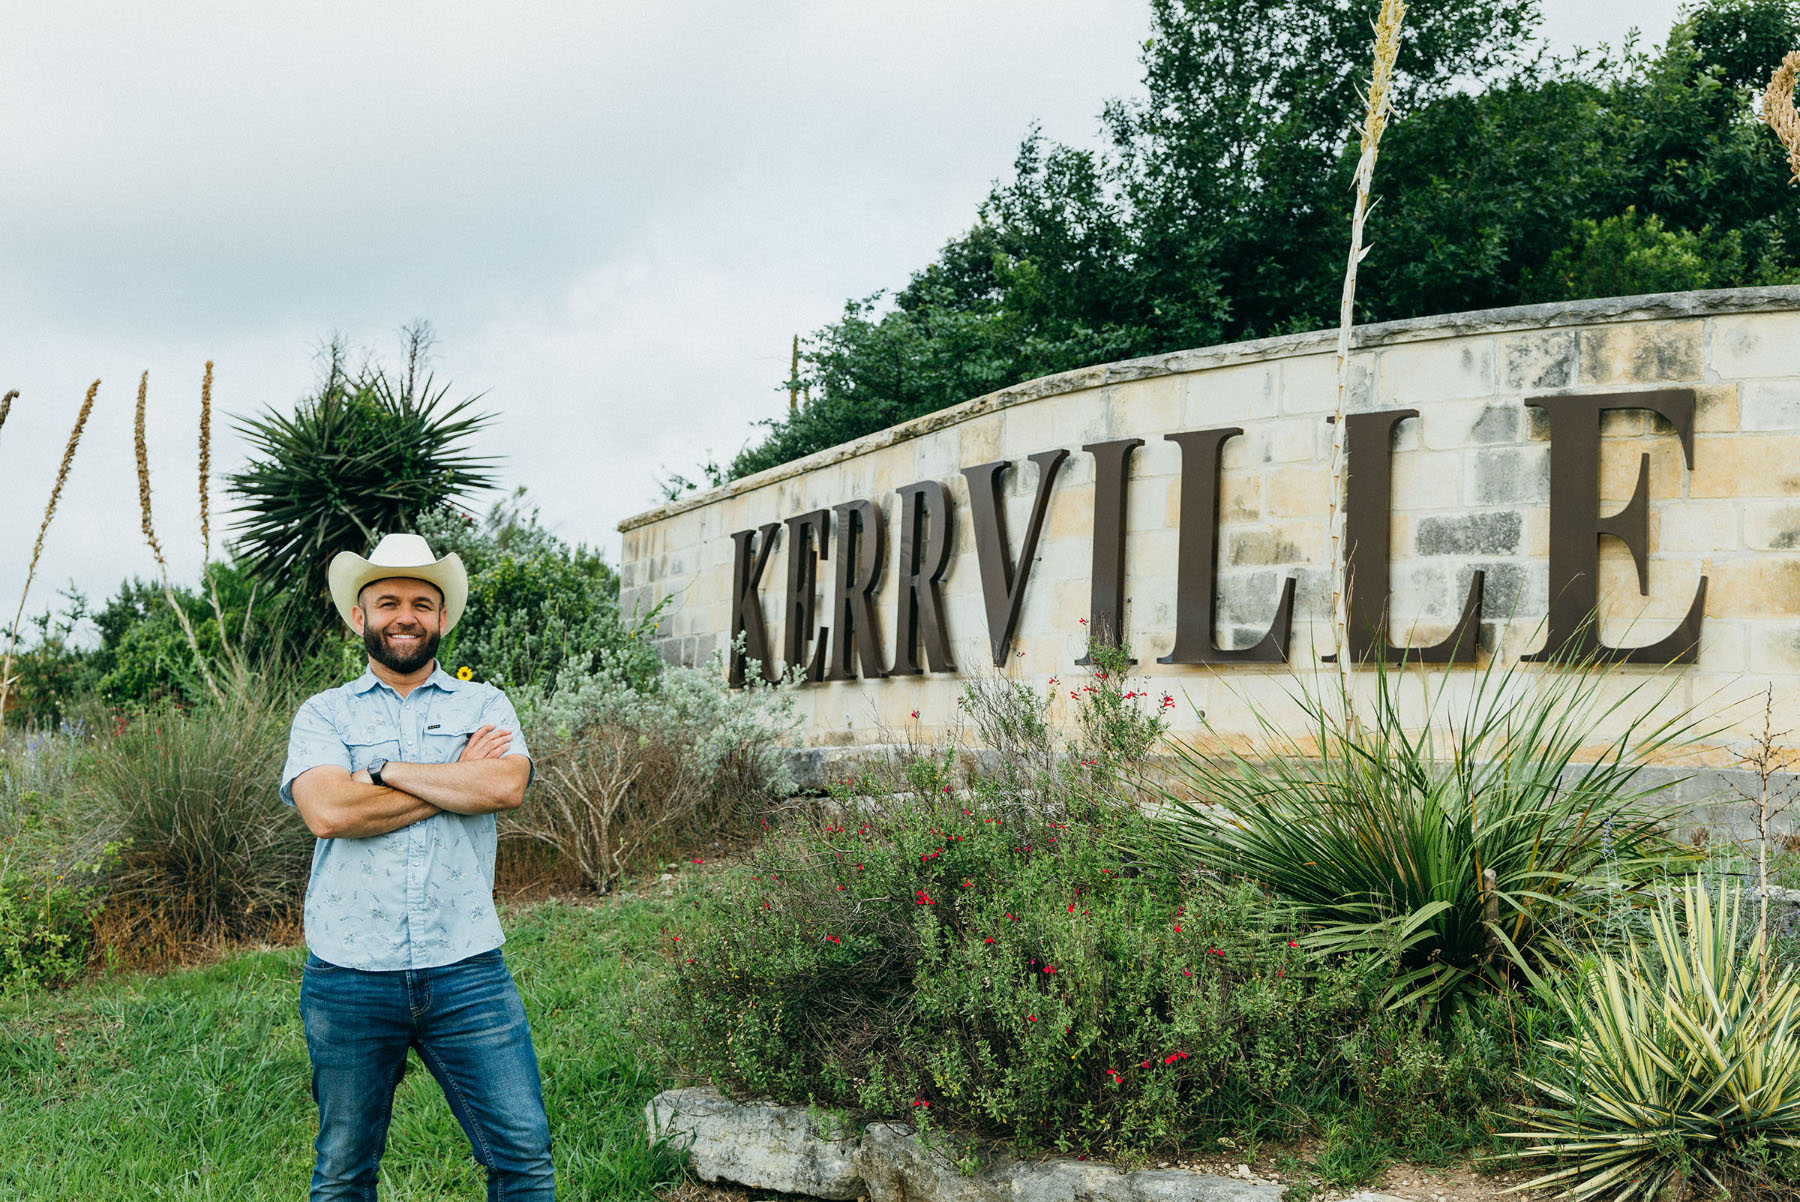 A man in a cowboy hat stands next to a stone sign reading "Kerrville"